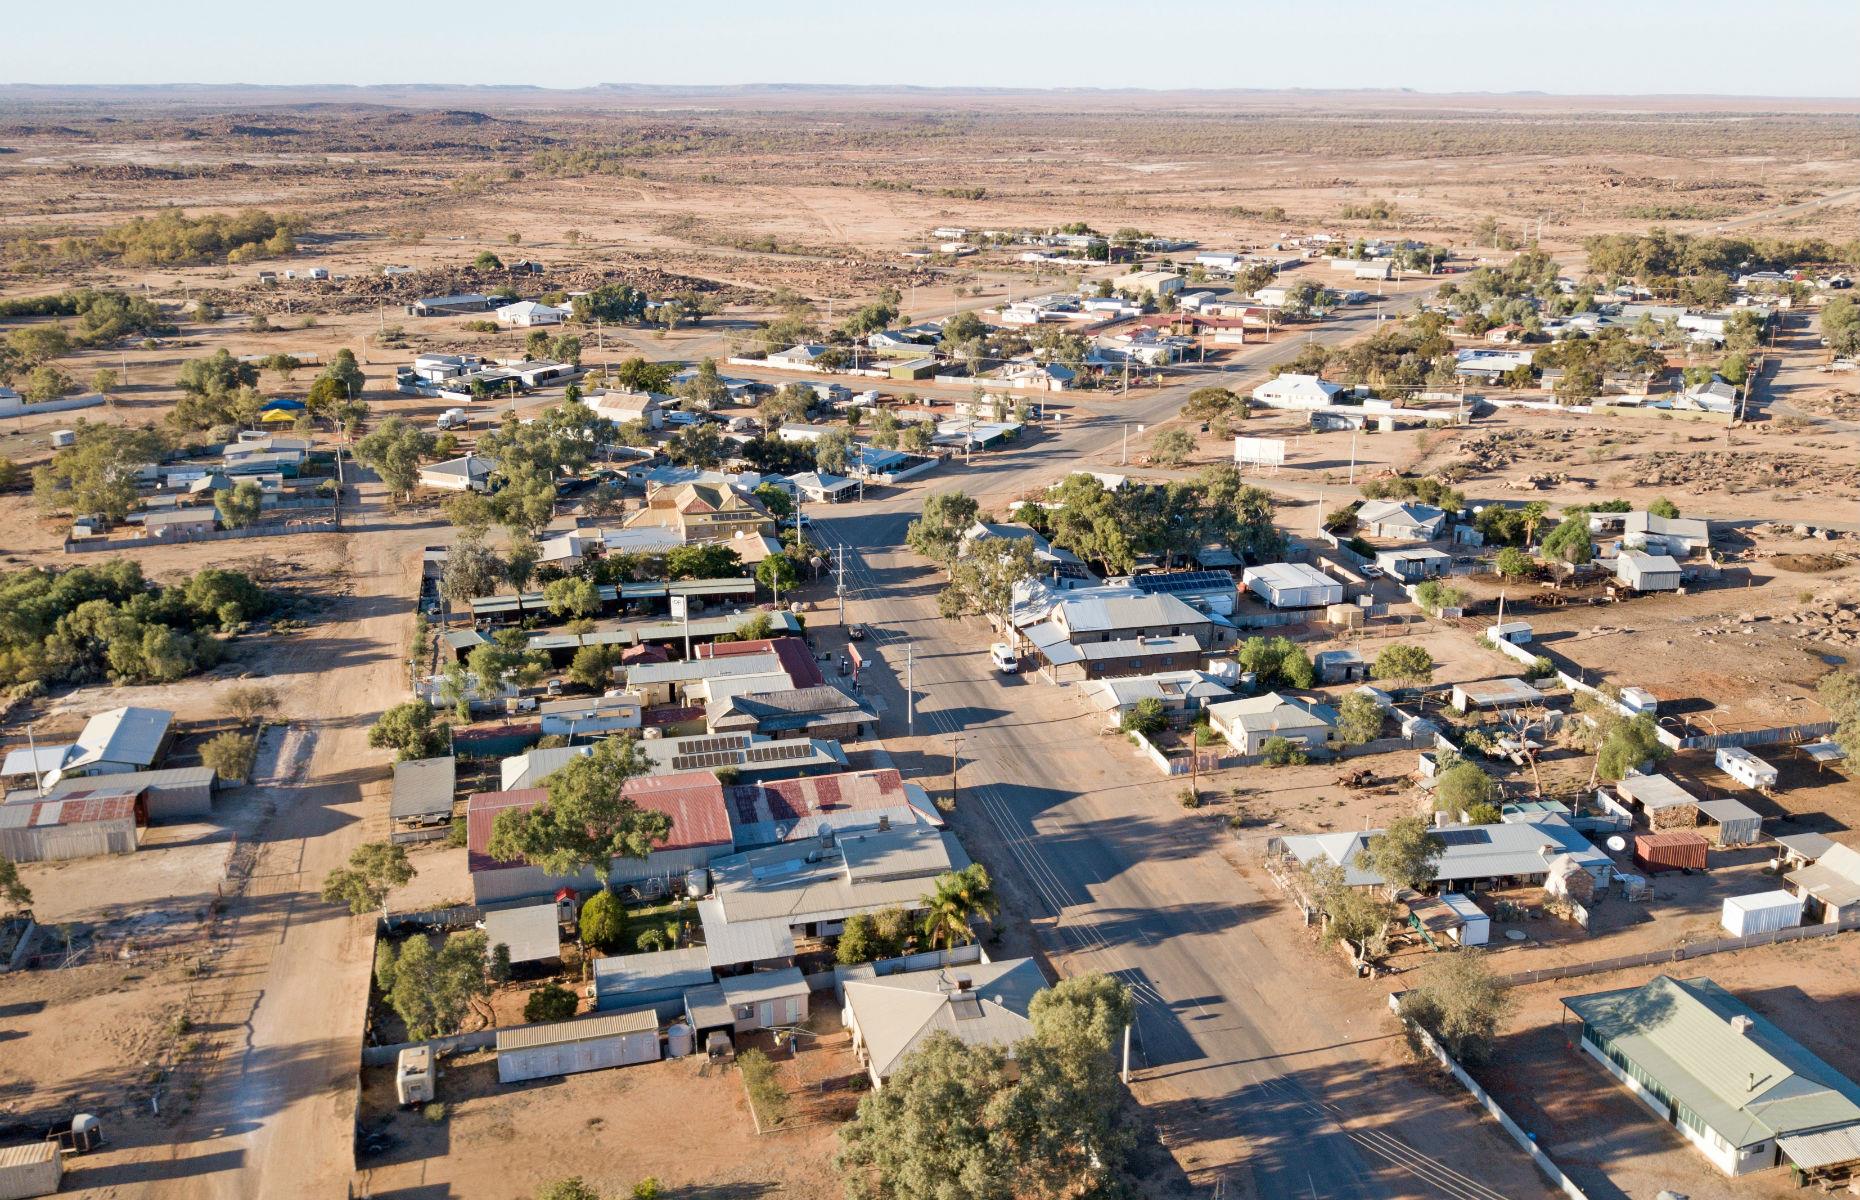 <p>A 17-hour drive northwest of Sydney, Tibooburra is in “Corner Country” – set near the borders of NSW, Queensland and South Australia. As with others, the small town has been affected by NSW’s <a href="https://www.abc.net.au/news/2019-09-16/drought-now-affecting-even-the-greenest-parts-of-the-country/11487026">worst-ever drought</a> in recent years. Get chatting to the hardy locals at the friendly <a href="https://tibooburra.com.au/the-family-hotel.html">Family Hotel</a> to hear about life in the outback, then get out into the vast surrounds of the Sturt National Park. See 450-million-year-old granite tors and take a walk along a section of the dingo fence, the world’s largest man-made fence. </p>